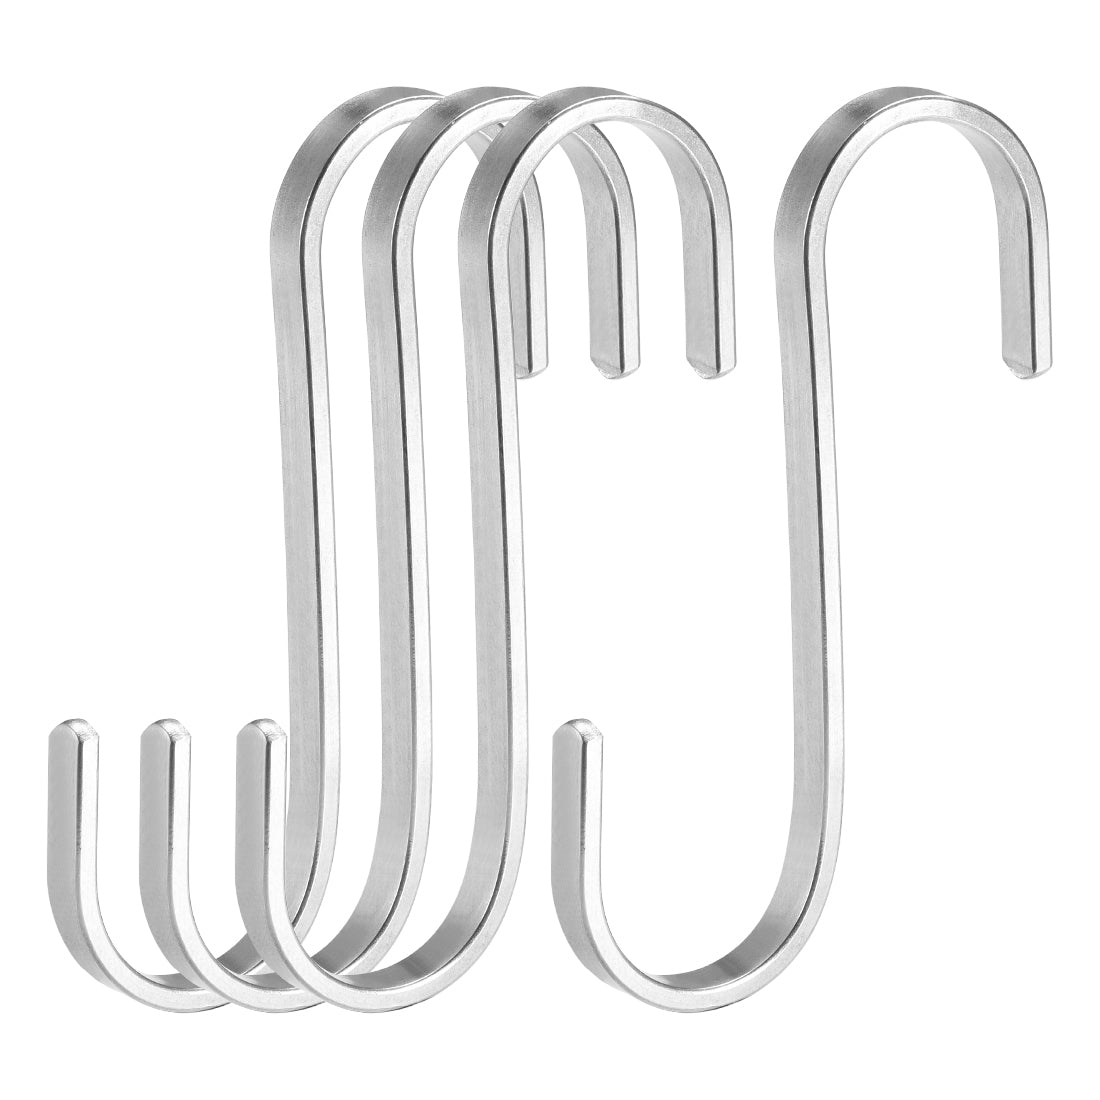 uxcell Uxcell Stainless Steel S Hooks 3" Flat S Shaped Hook Hangers 4pcs